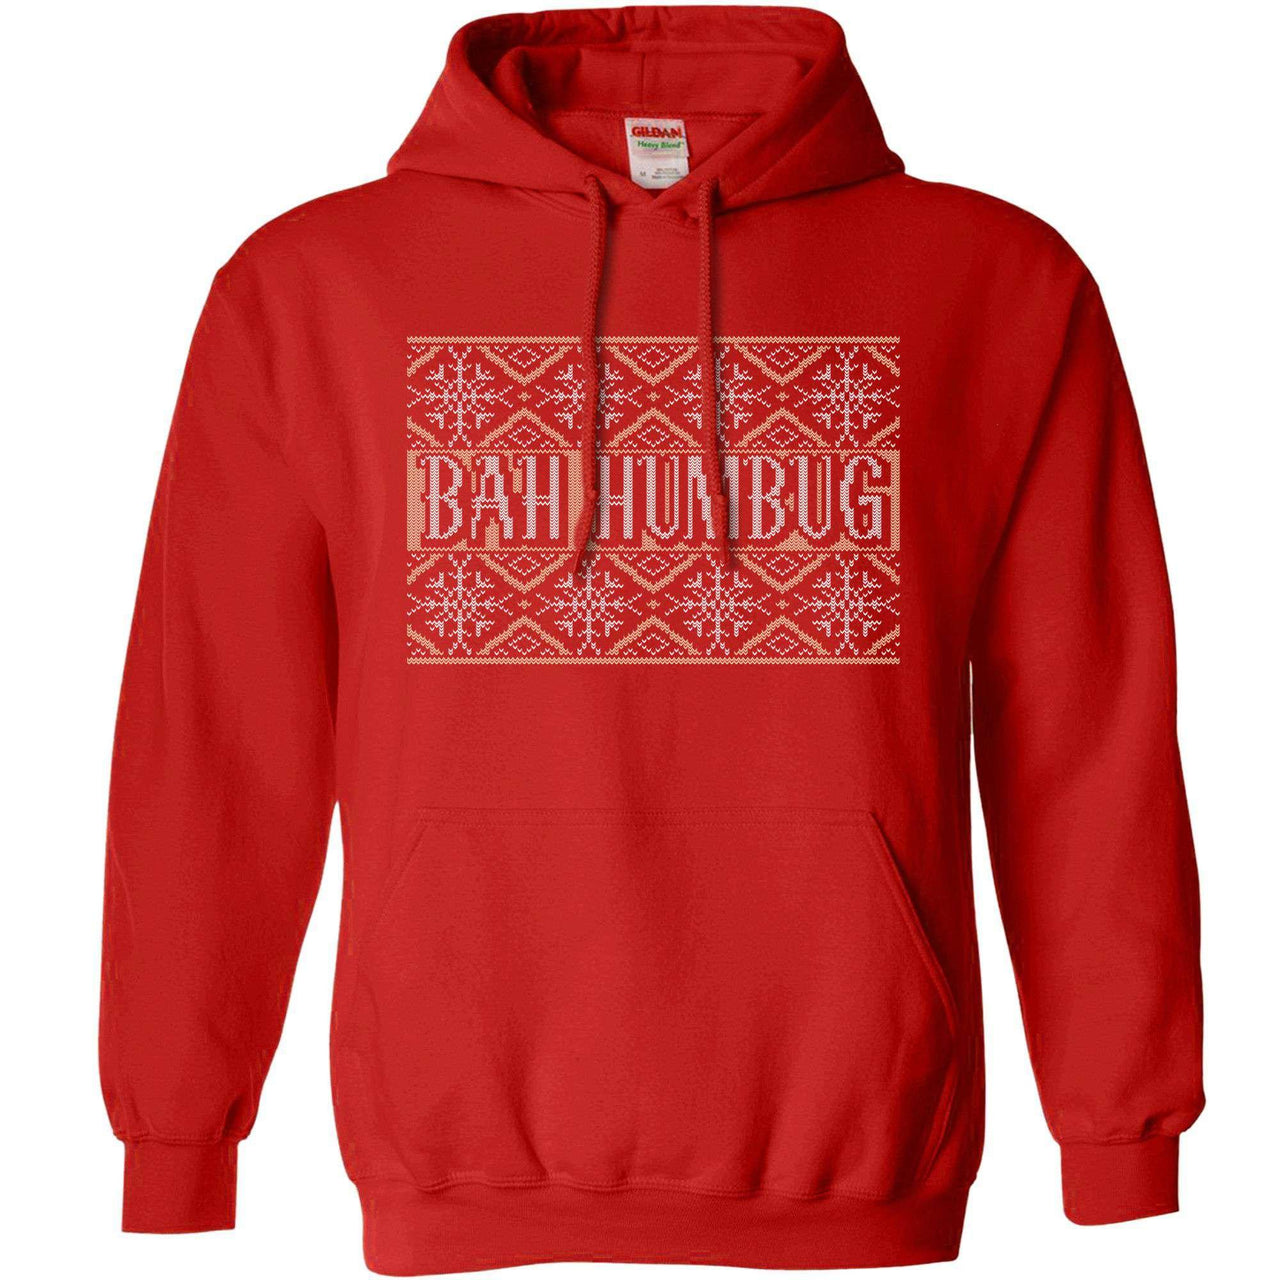 Bah Humbug Knitted Jumper Style Hoodie For Men and Women 8Ball